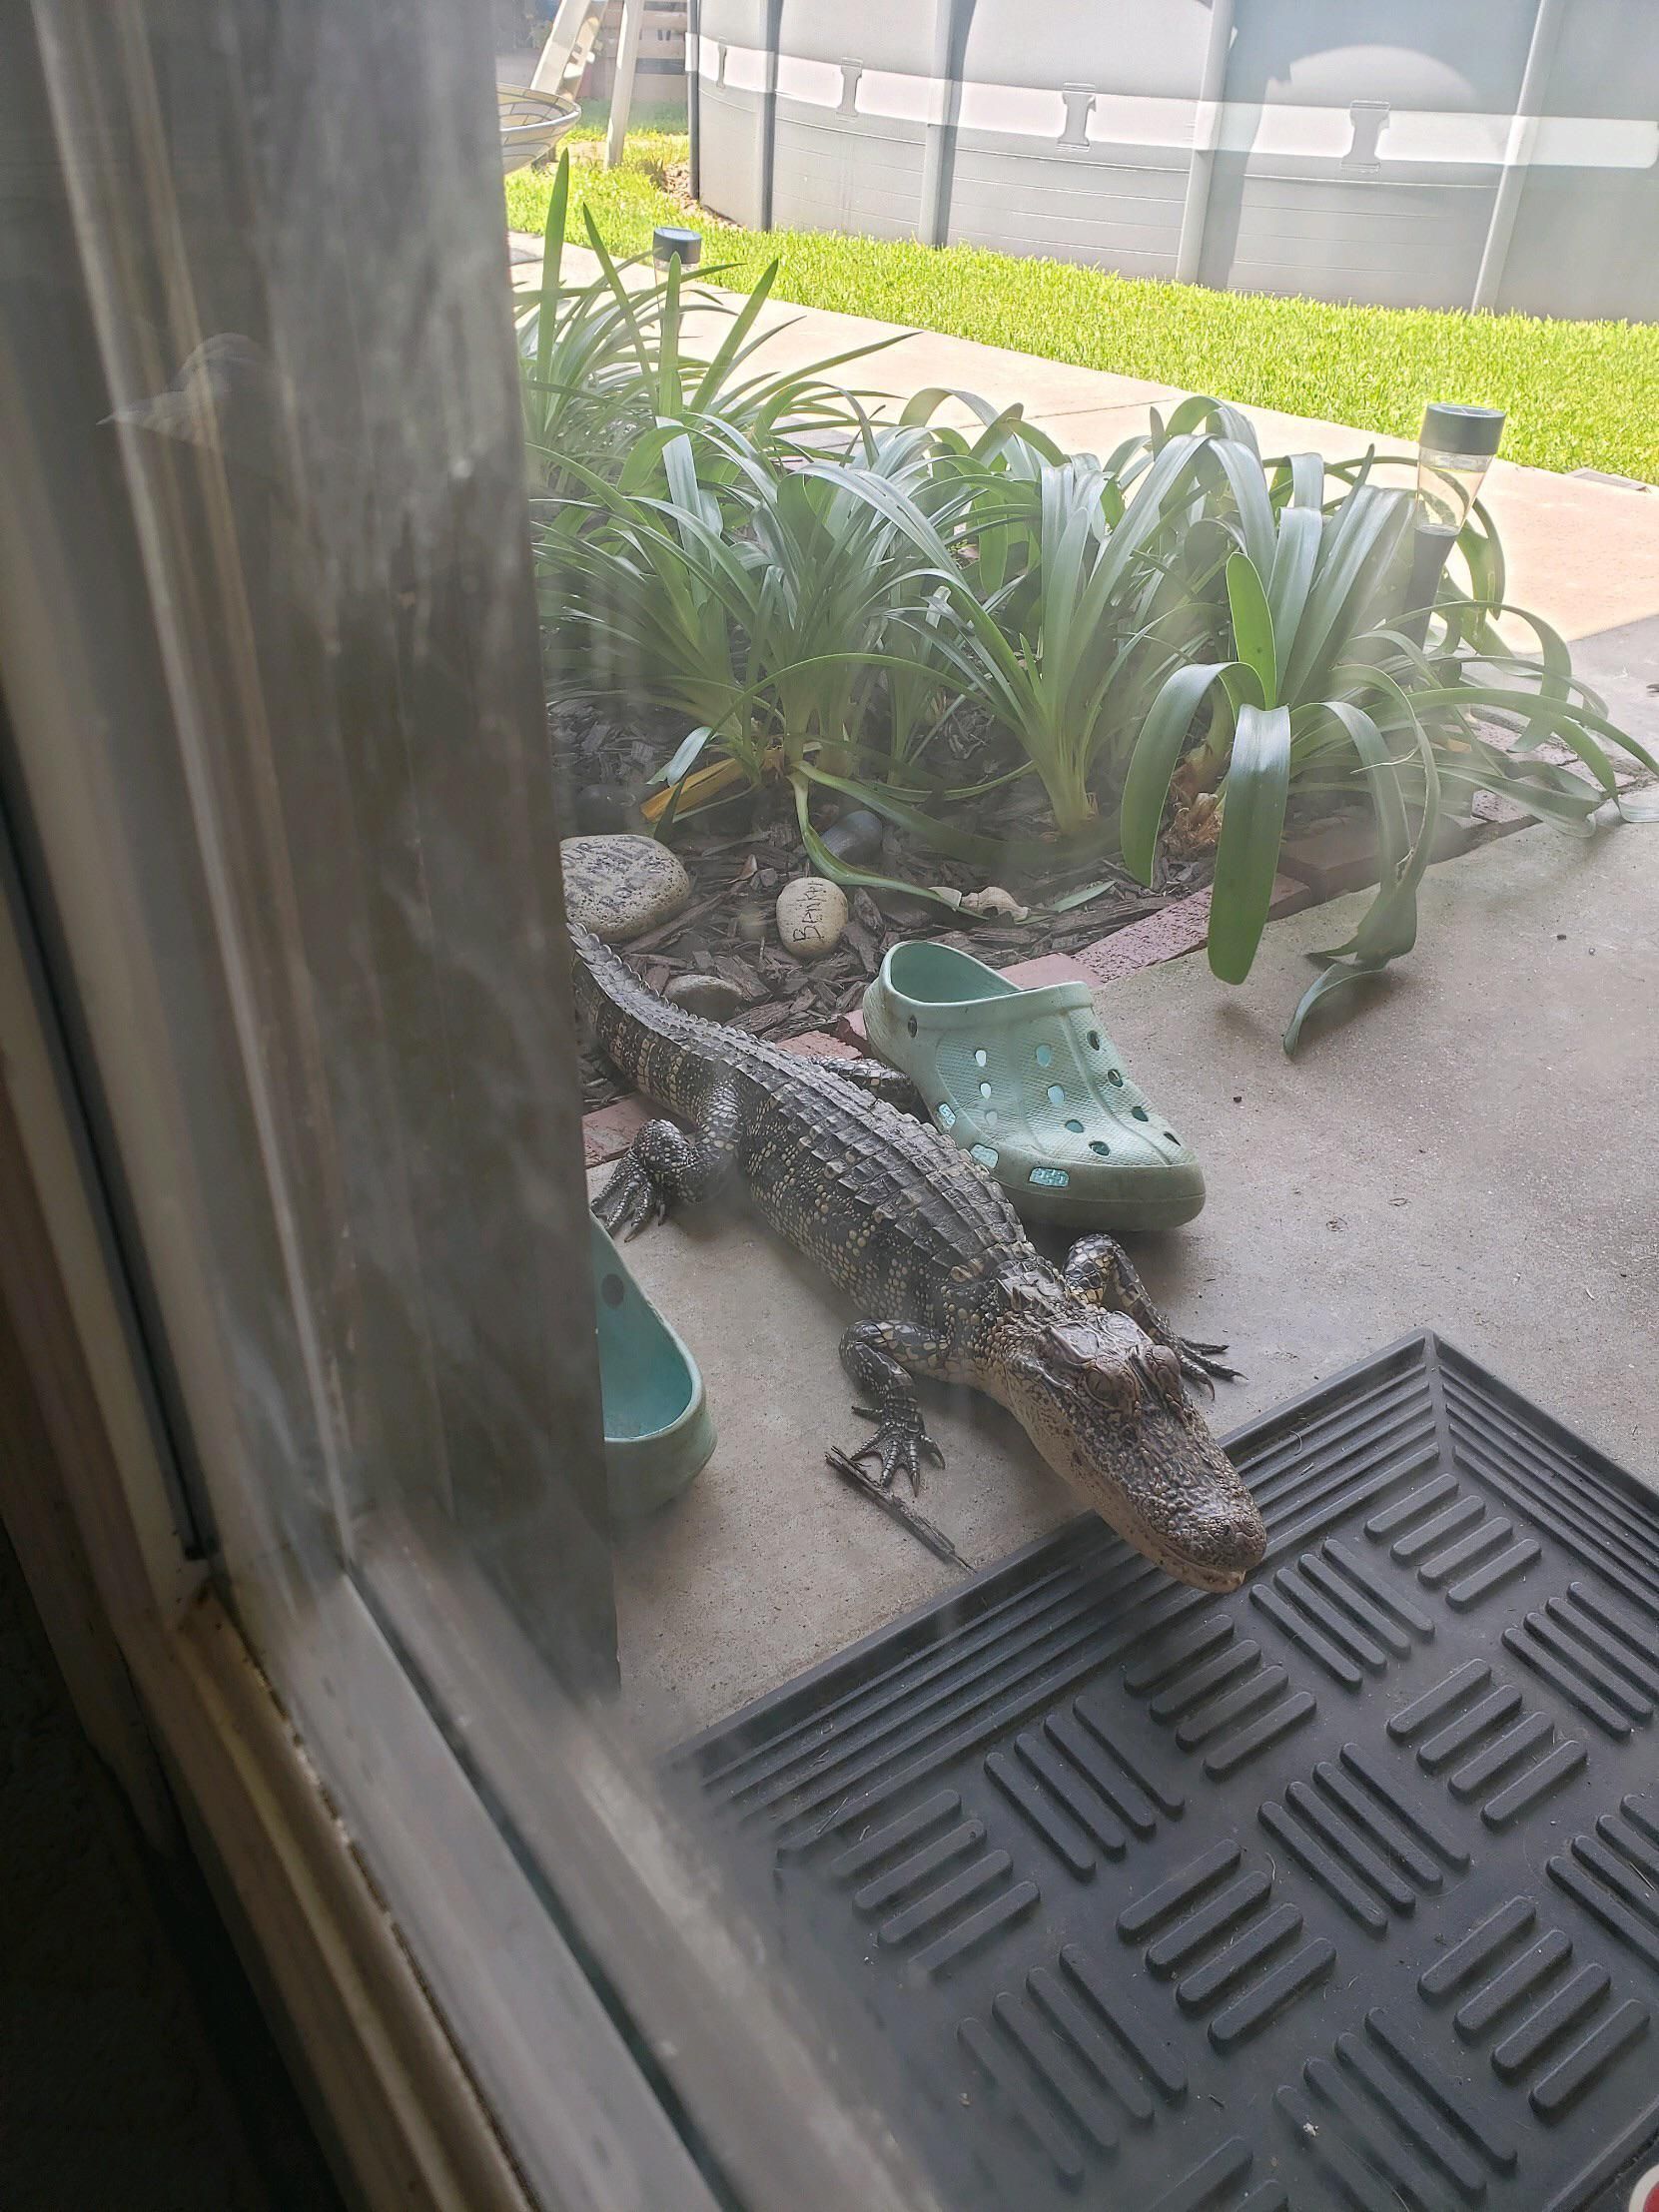 Just a baby gator chillin’ with the crocs on the back porch. He’s adopted.